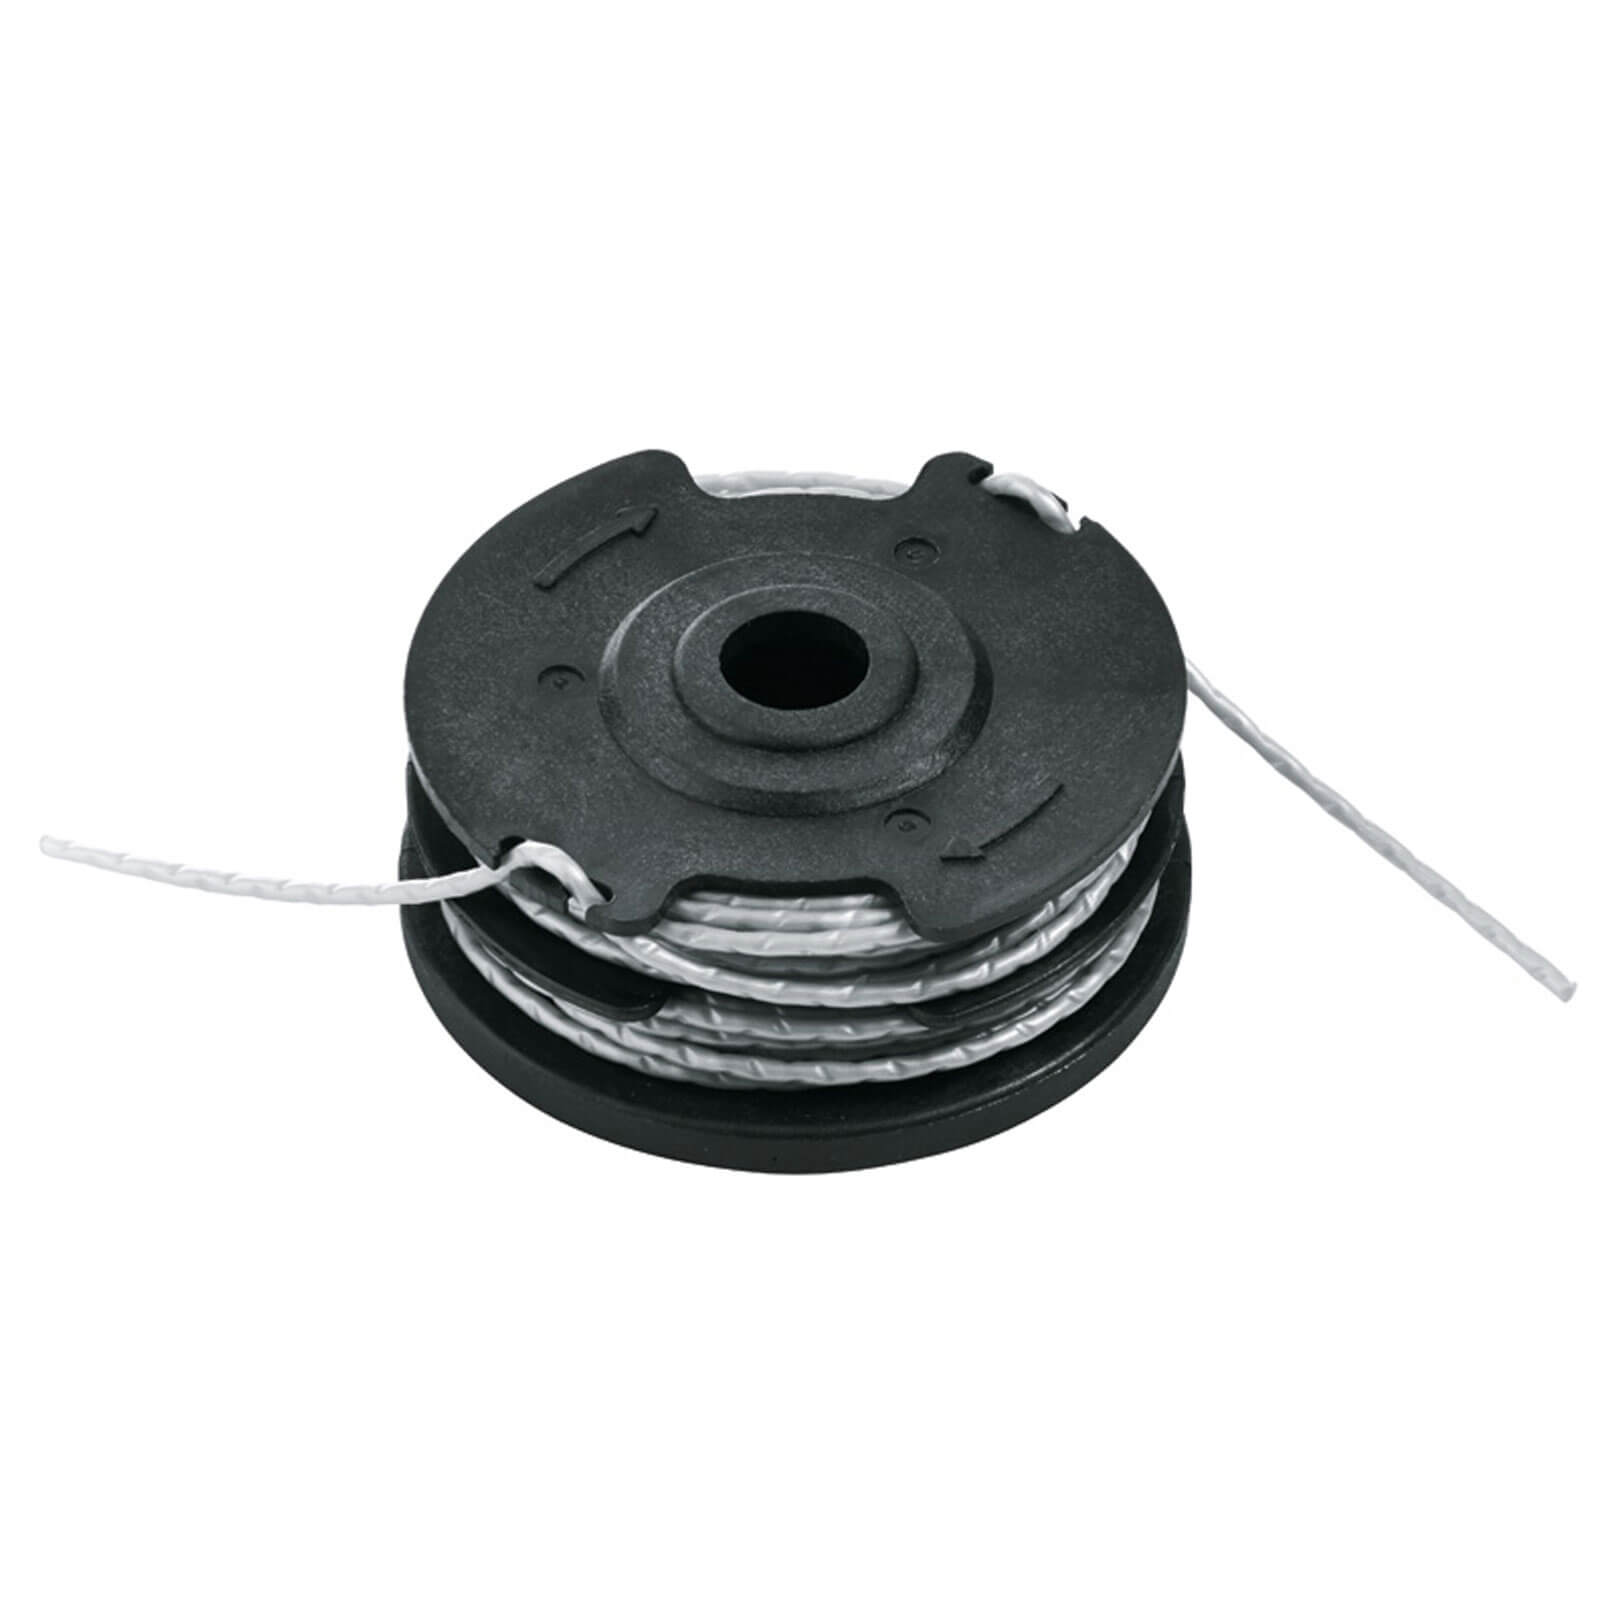 Image of Bosch Genuine Spool and Line for ART 24, 27, 30 and 36v Grass Trimmers Pack of 1